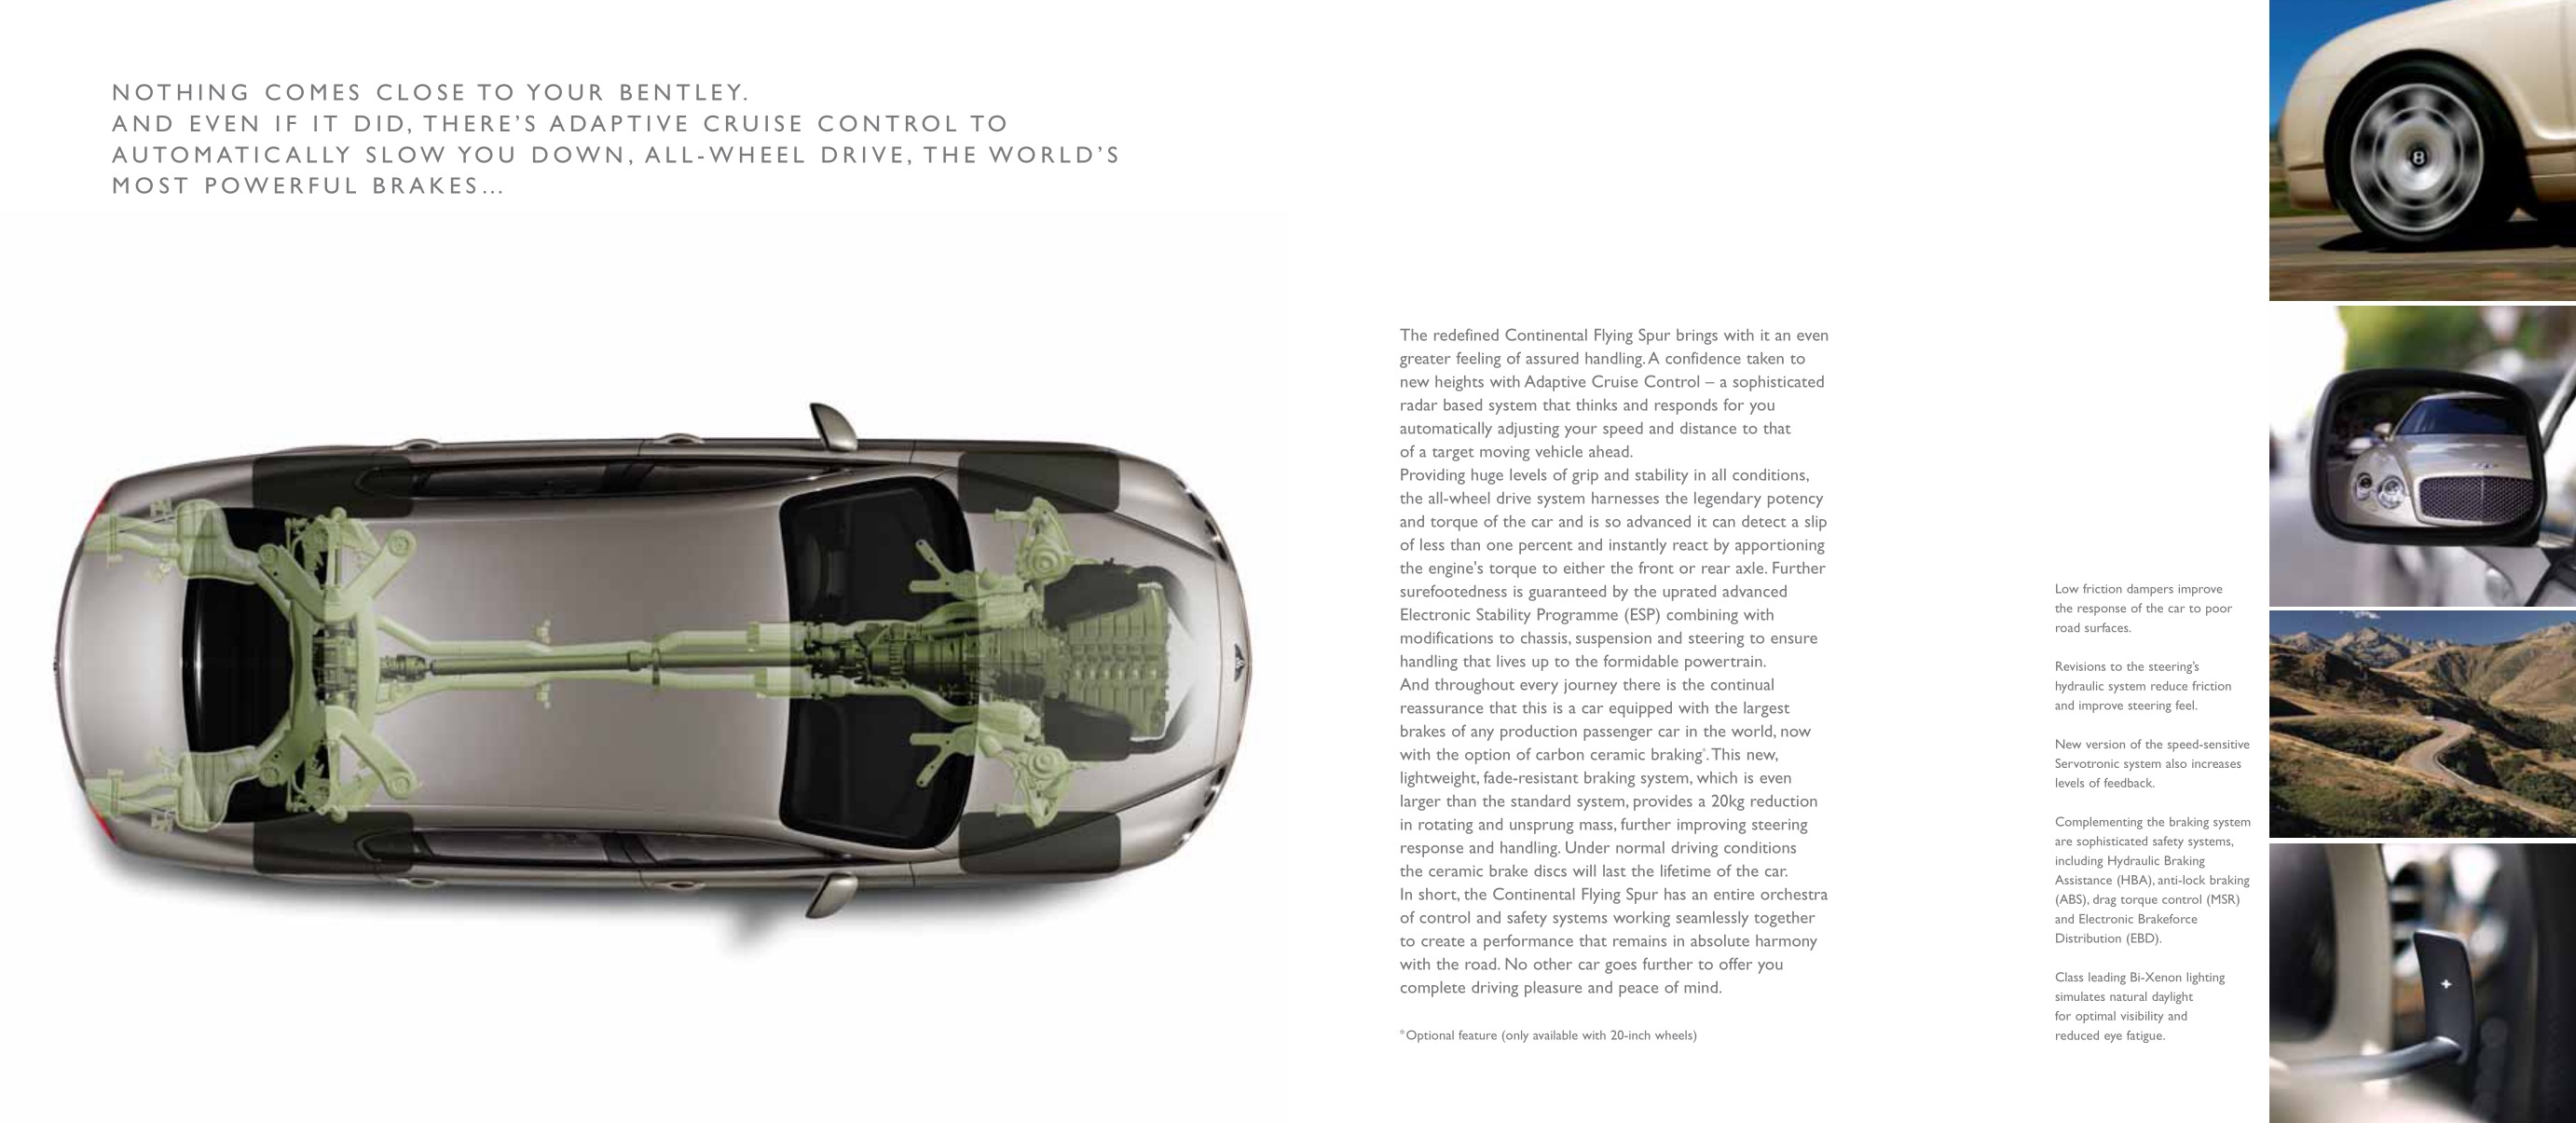 2009 Bentley Continental Flying Spur Brochure Page 13